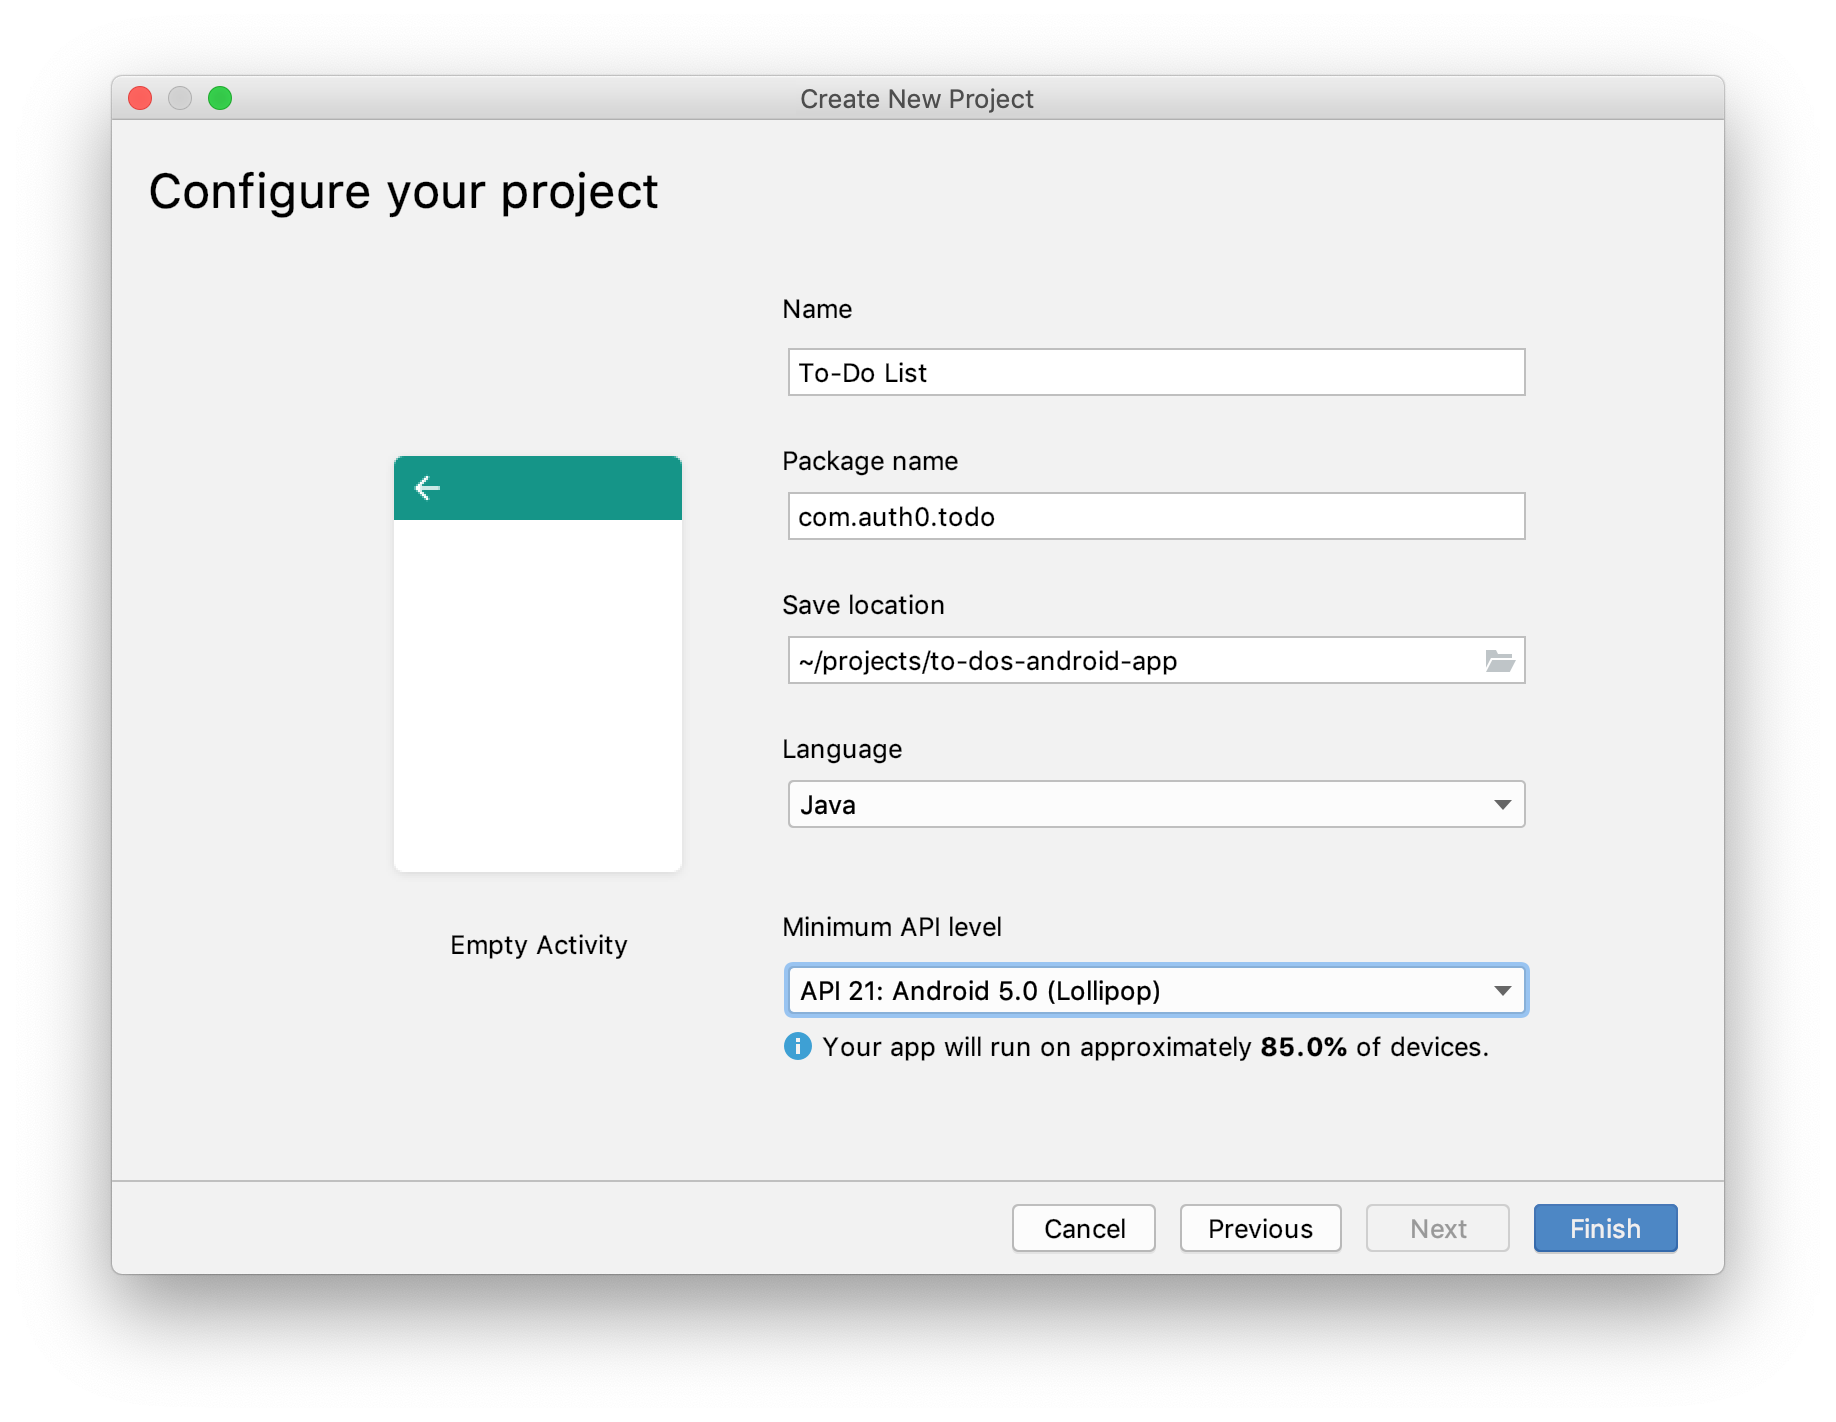 Configure the final settings of your new Android project.